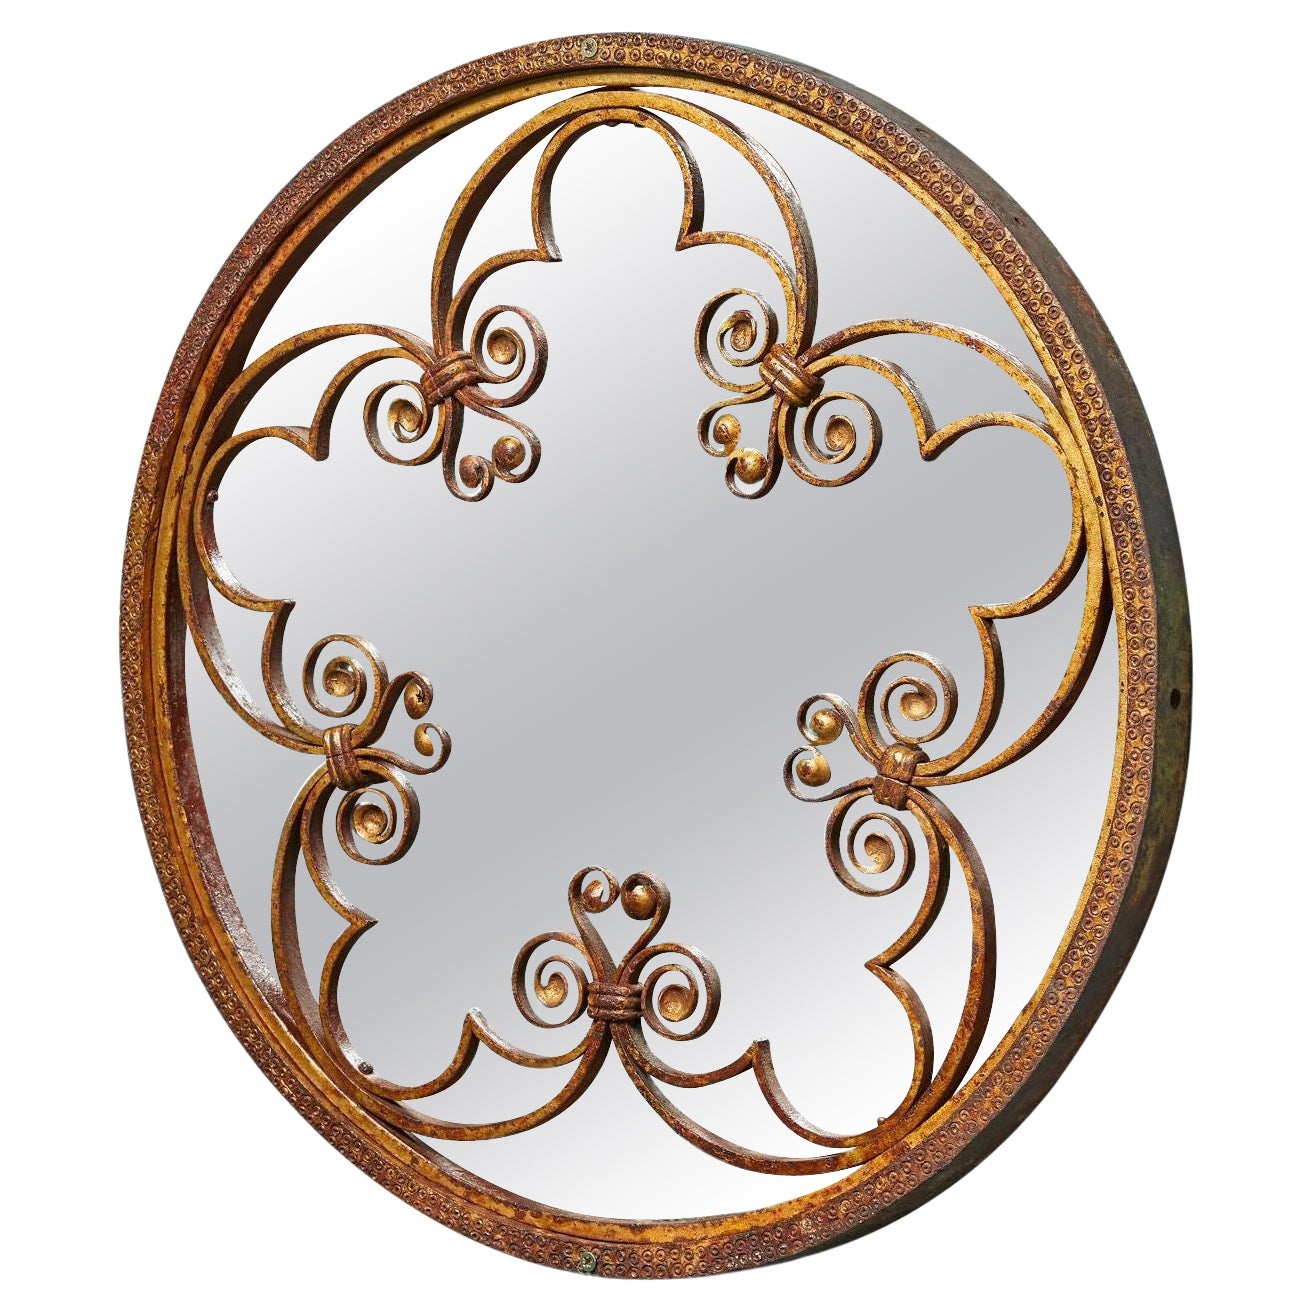 Ornate Round Antique Wrought Iron Mirror For Sale